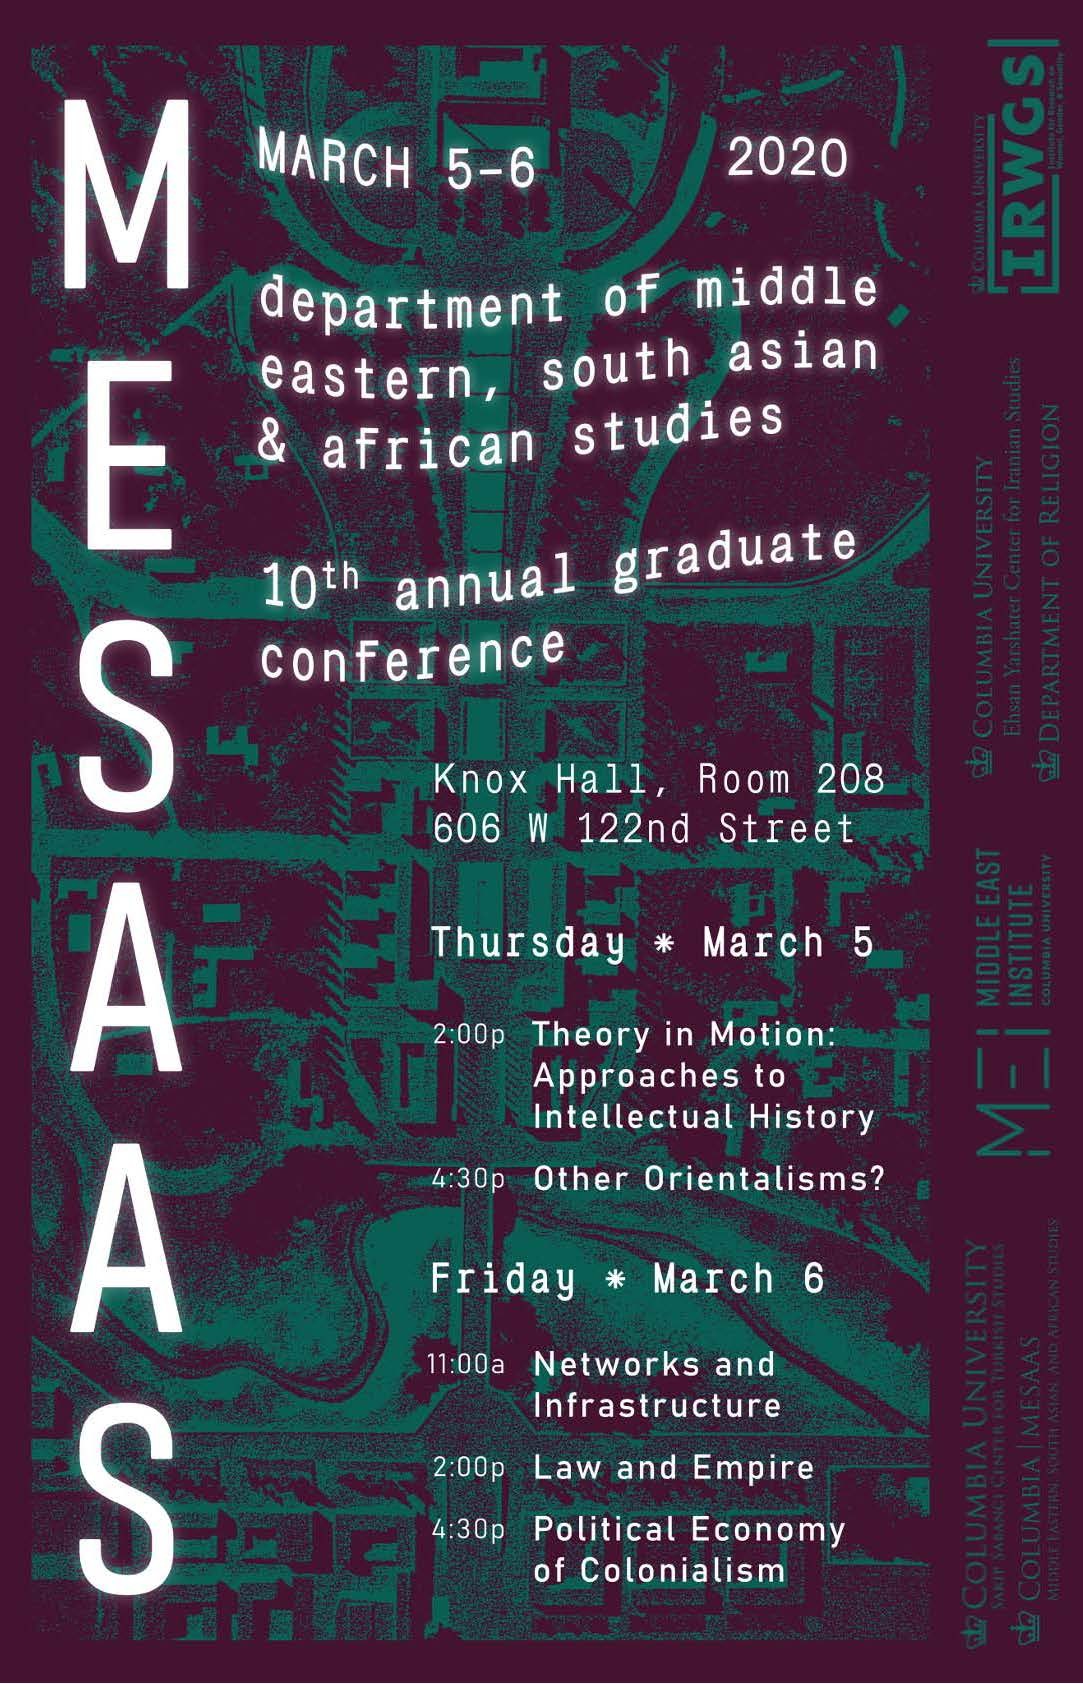 Flyer advertising the MESAAS Graduate Conference